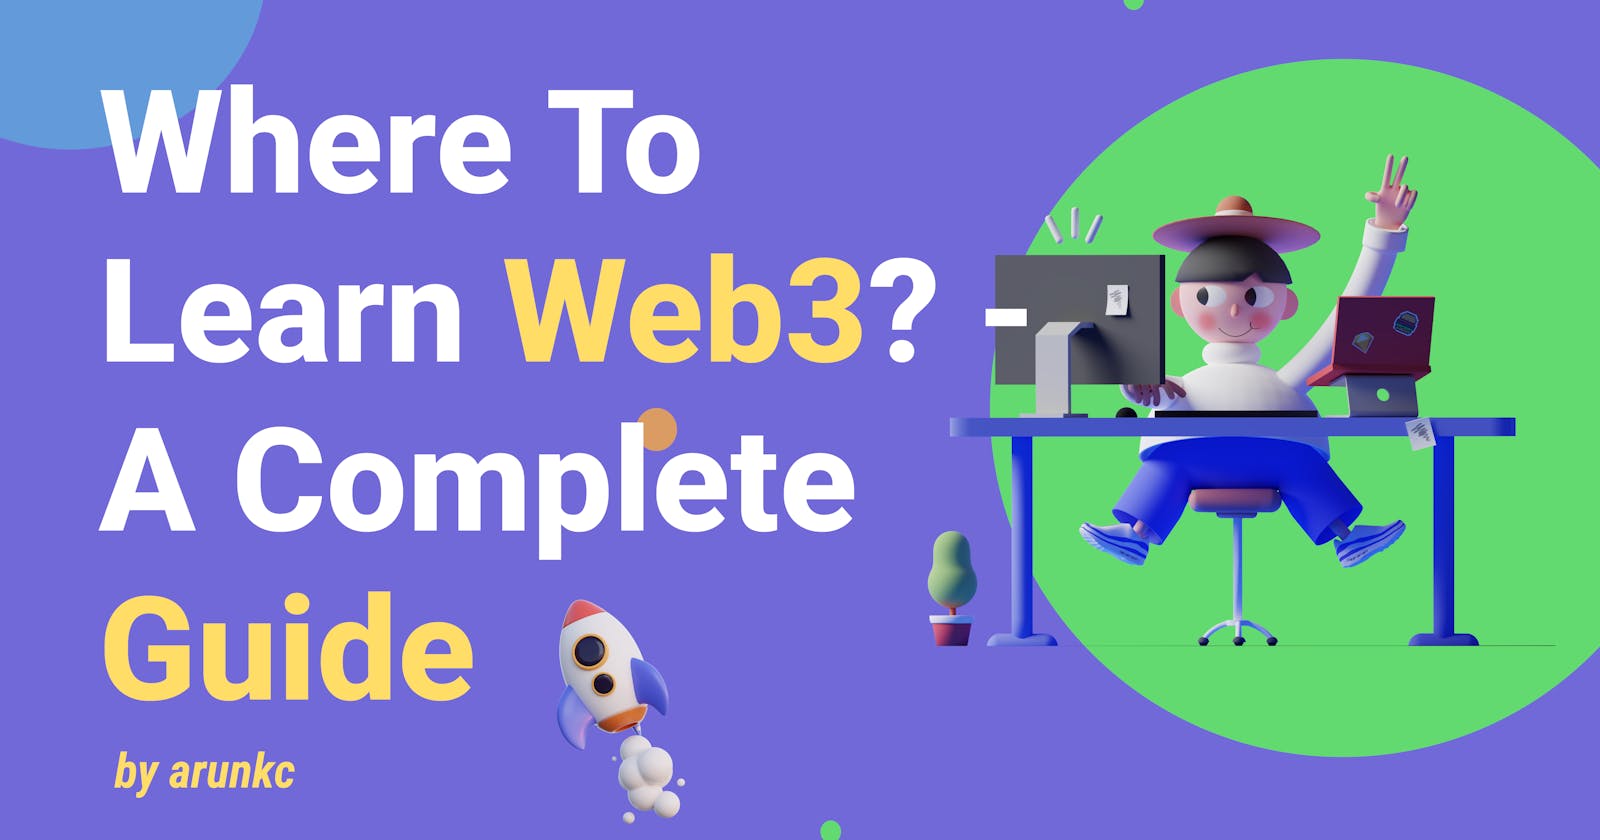 Where To Learn Web3 ? - A Complete Guide